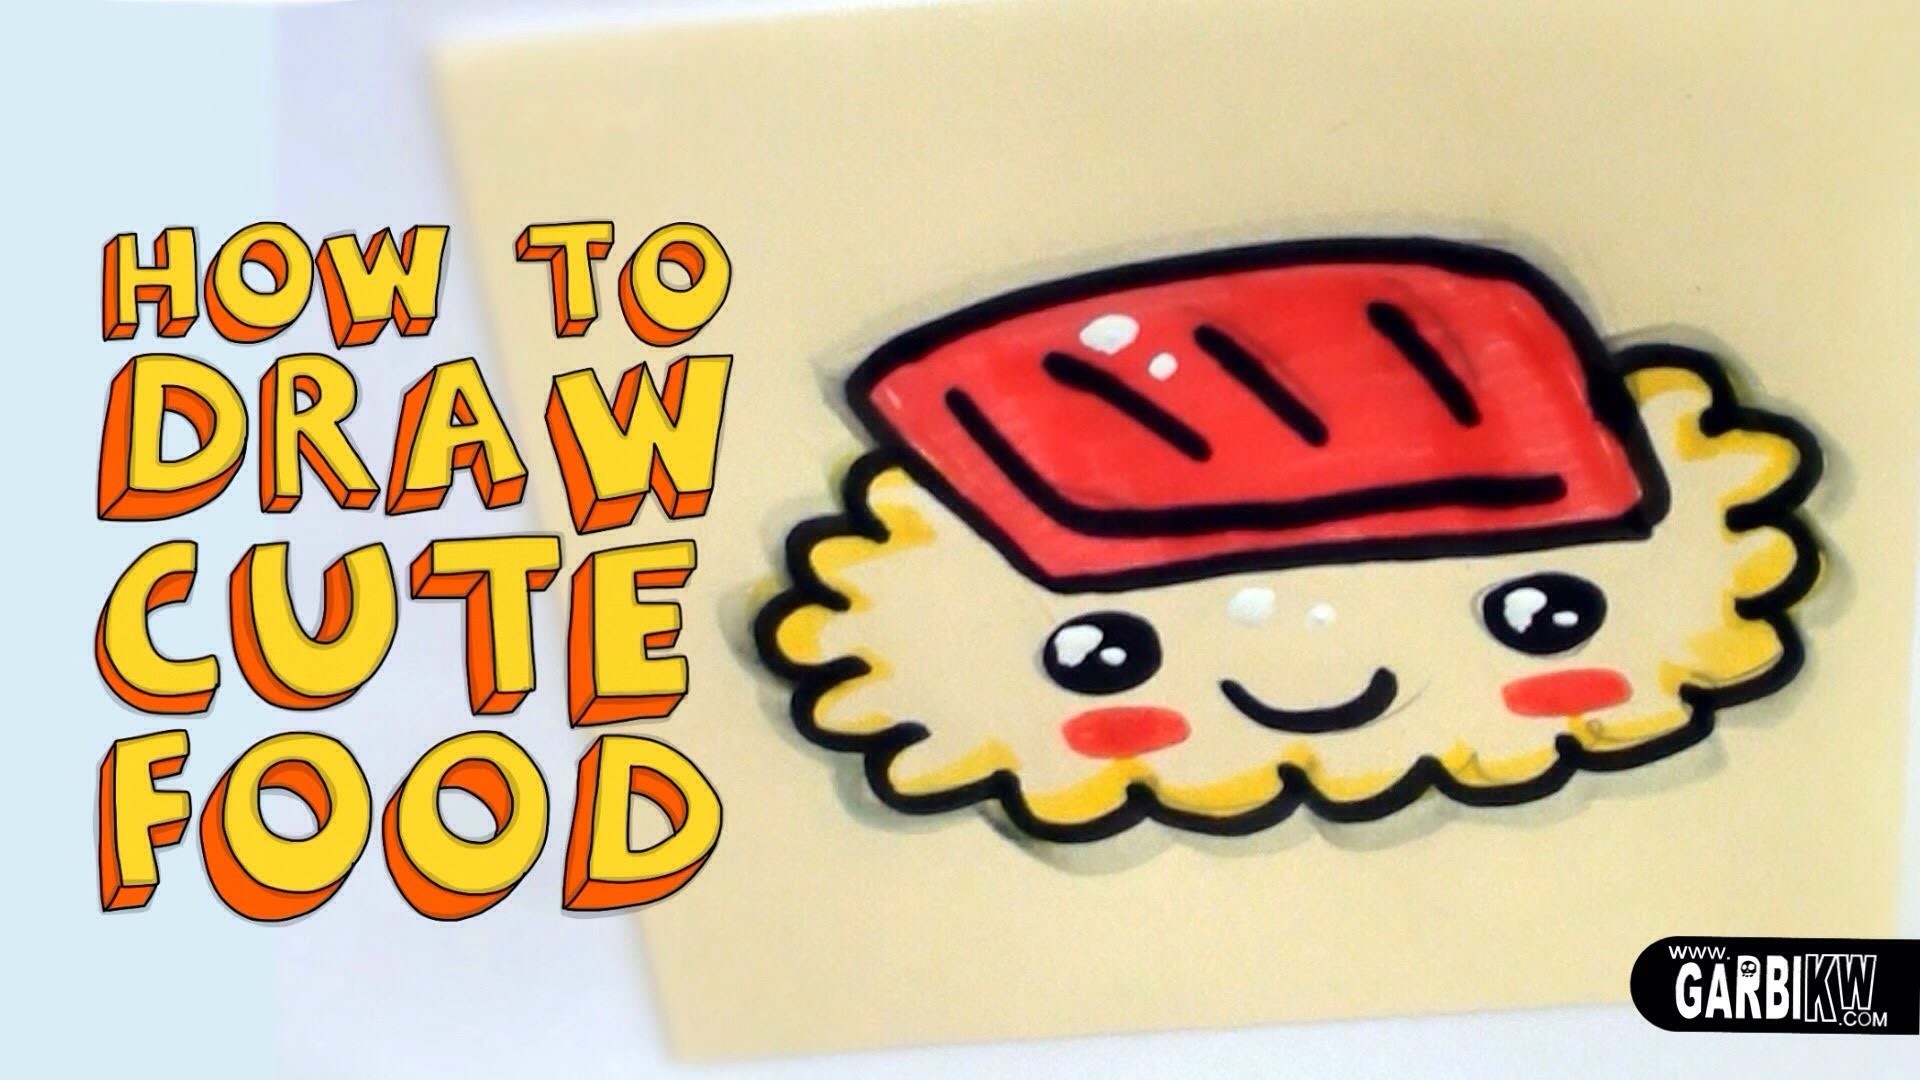 1920x1080 How To Draw a Cute Sushi - Kawaii Food - Easy Drawings by Garbi KW - YouTube